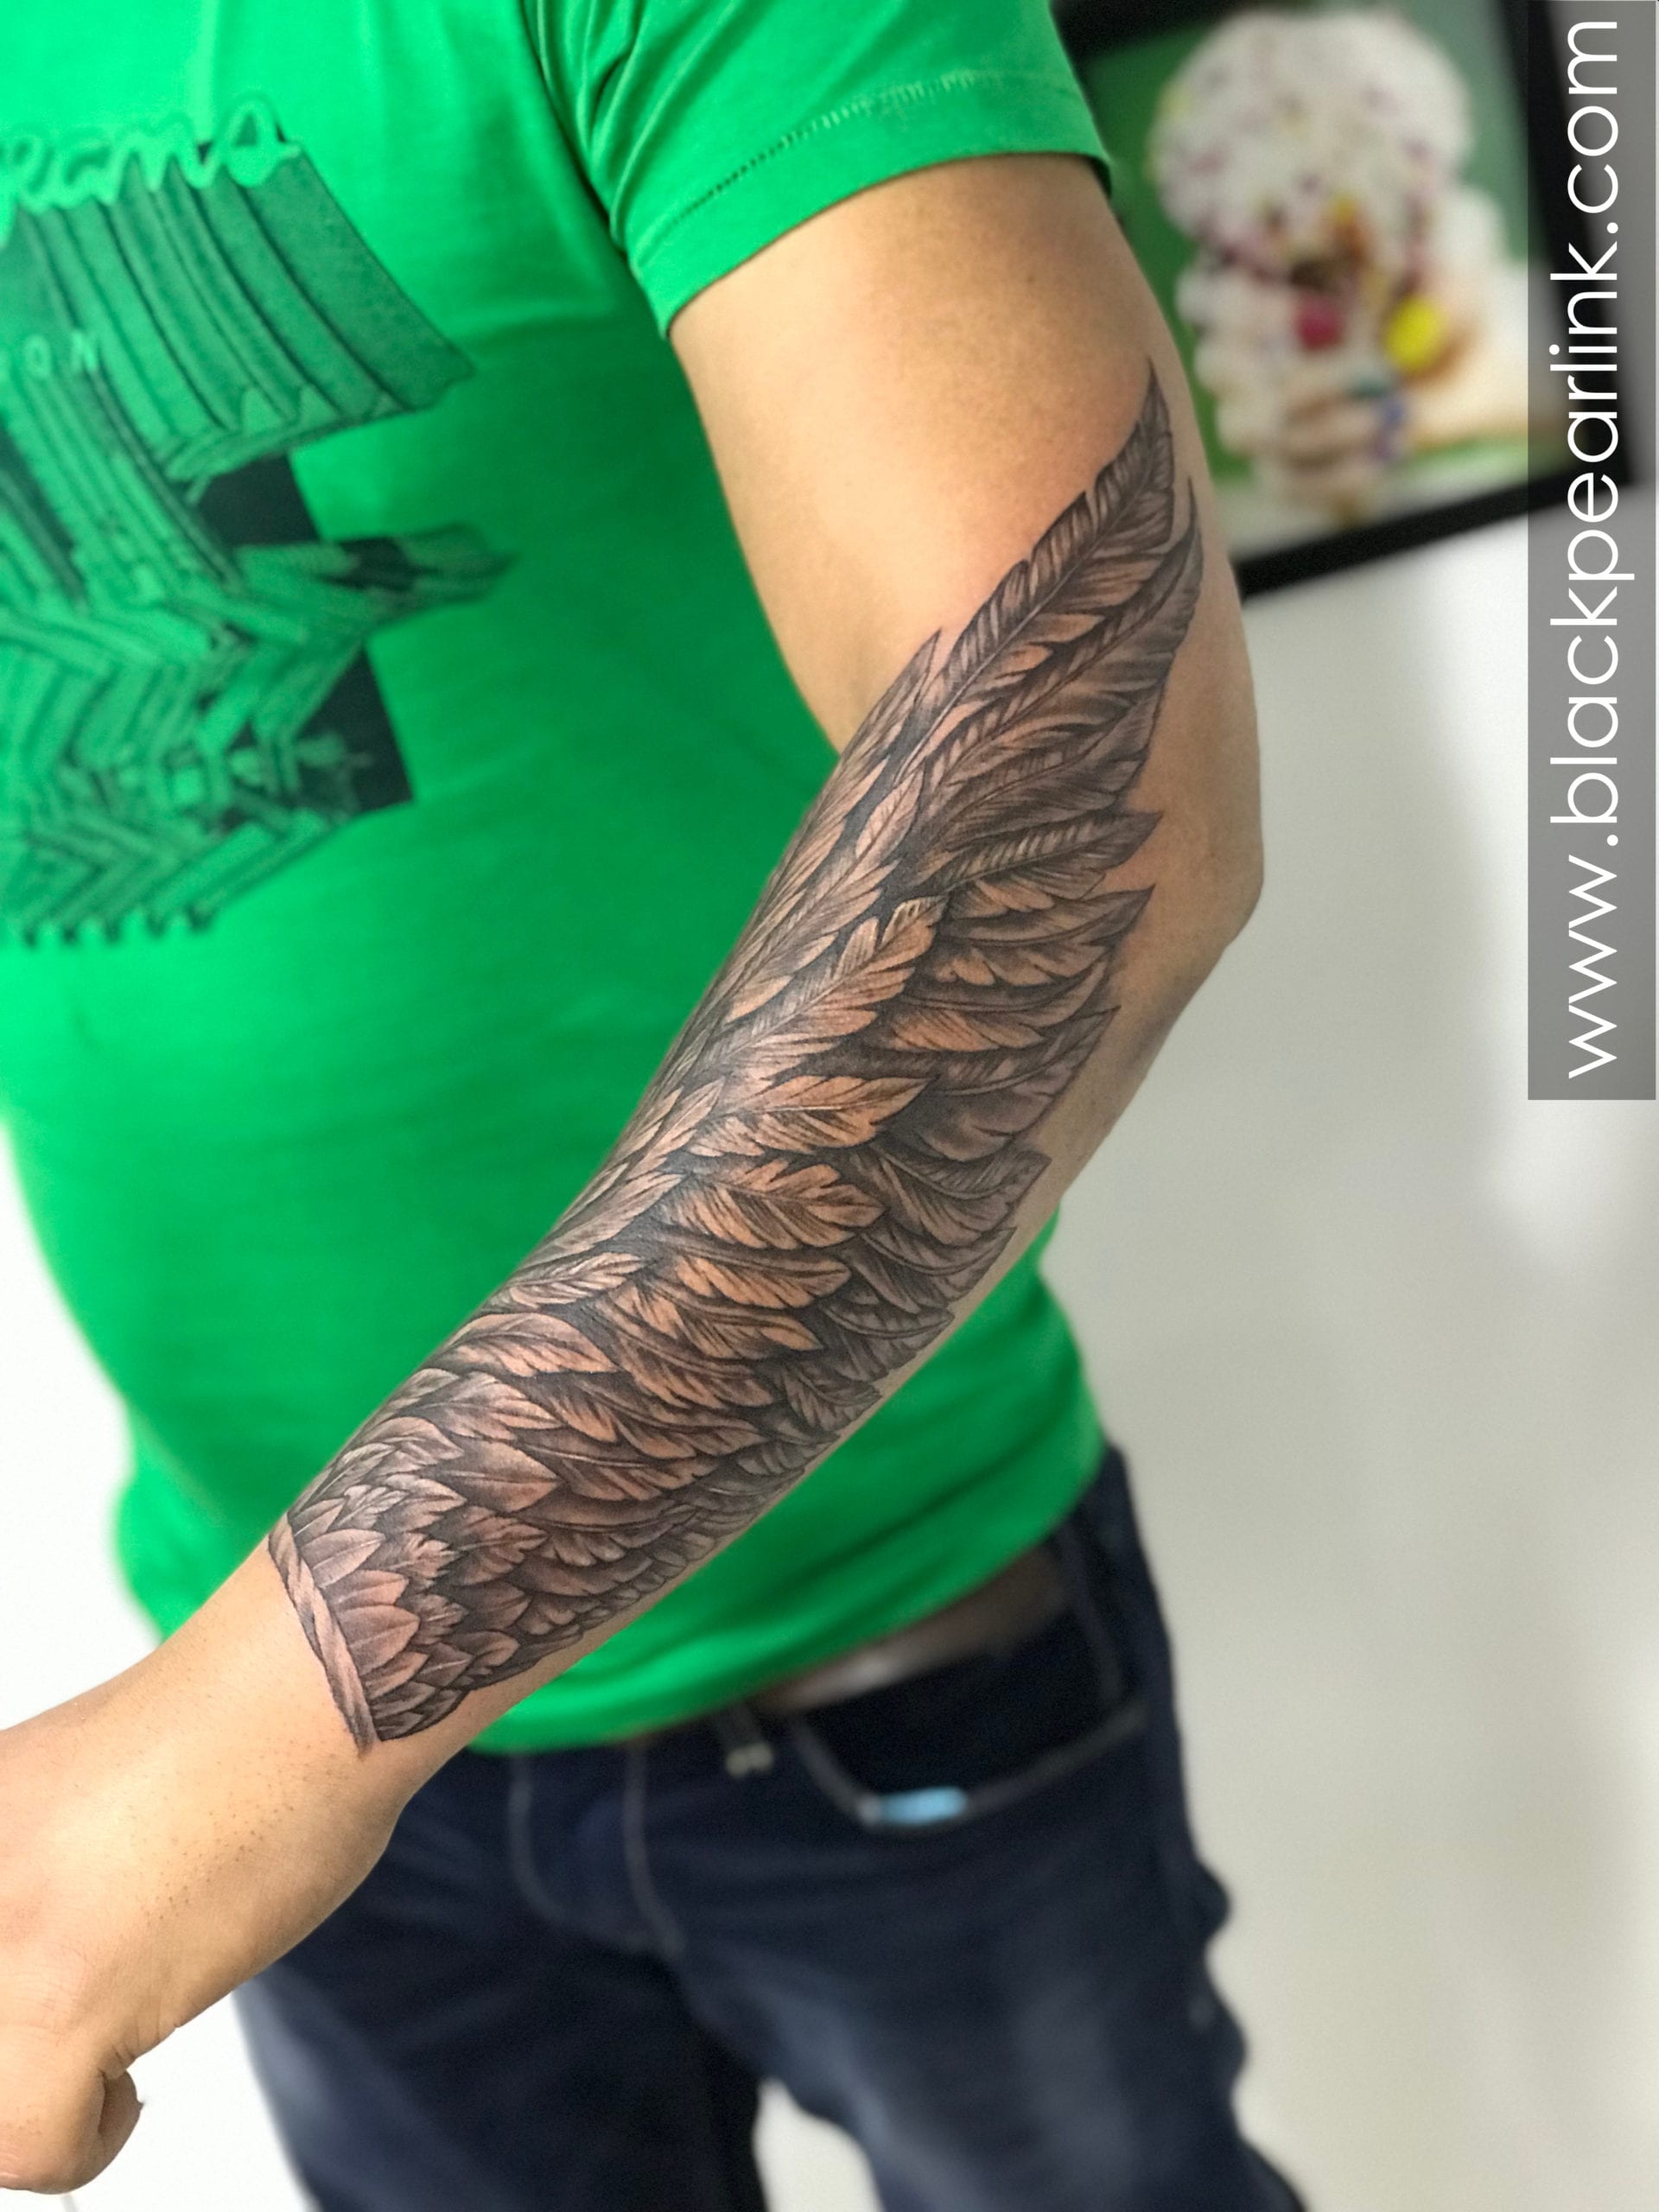 Forearm tattoo of a wing.